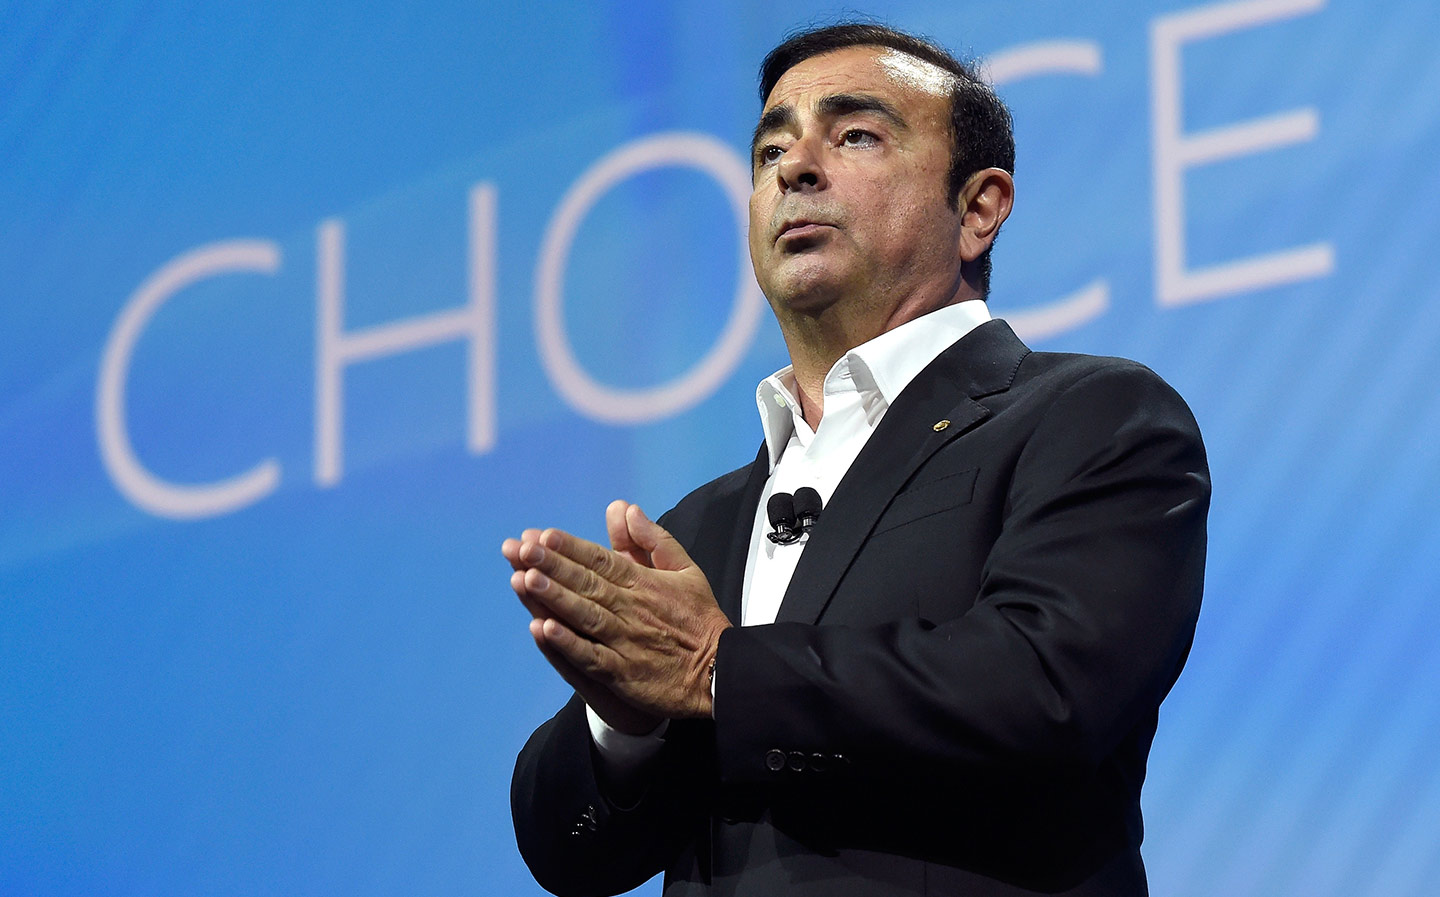 Nissan fires chairman Carlos Ghosn for financial misconduct